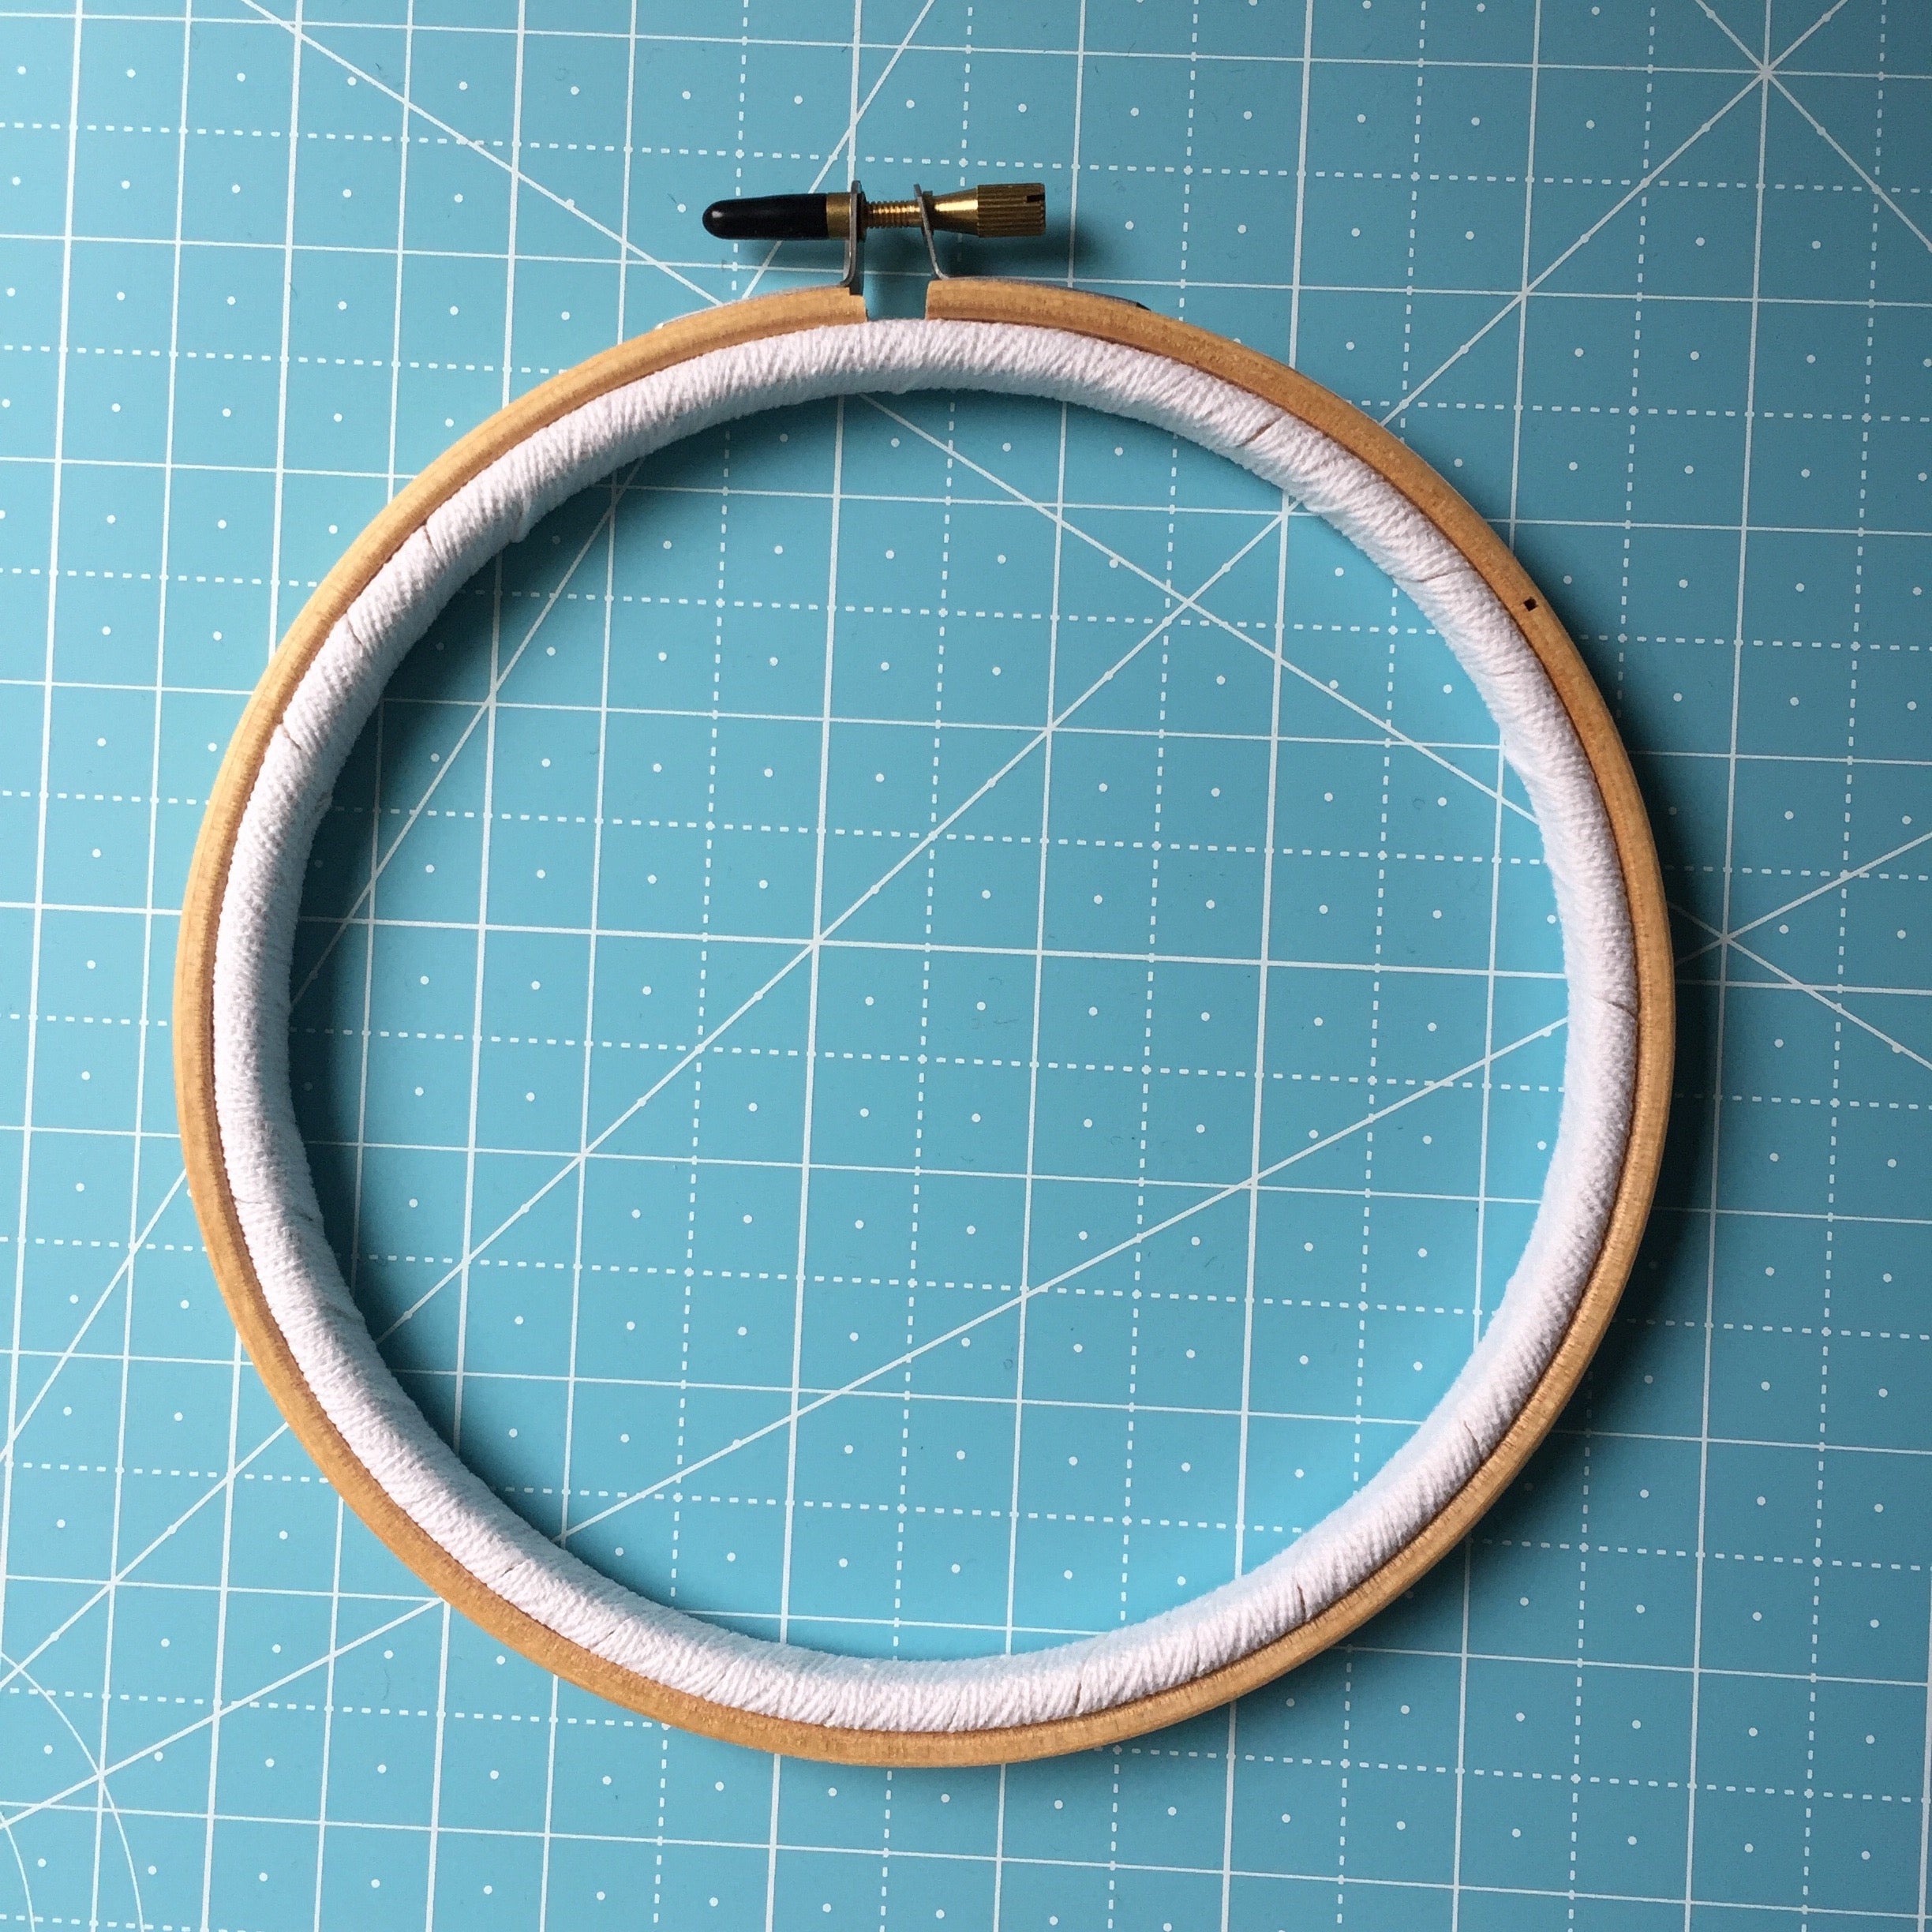 Improve Fabric Tension by Binding Your Embroidery Hoop – Snuggly Monkey